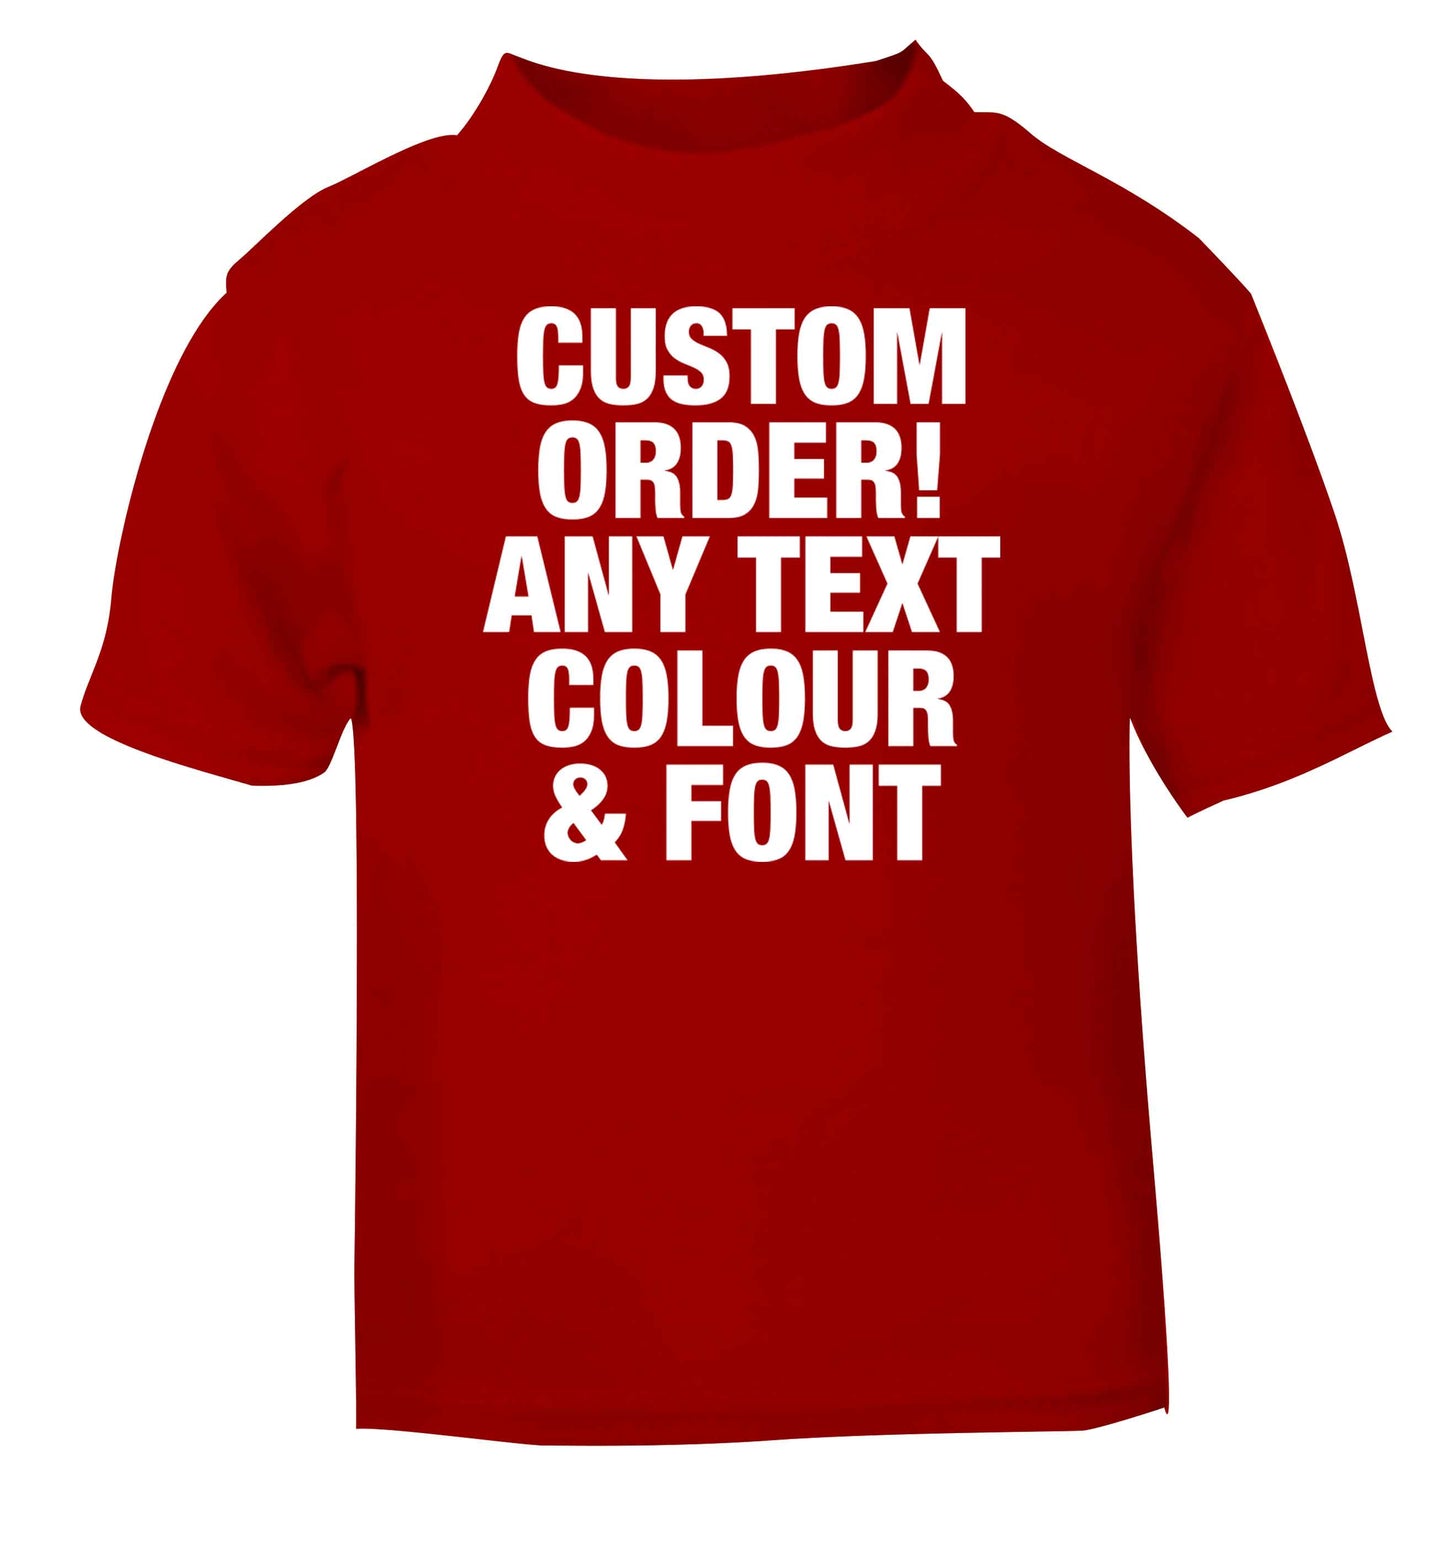 Custom order any text colour and font red baby toddler Tshirt 2 Years